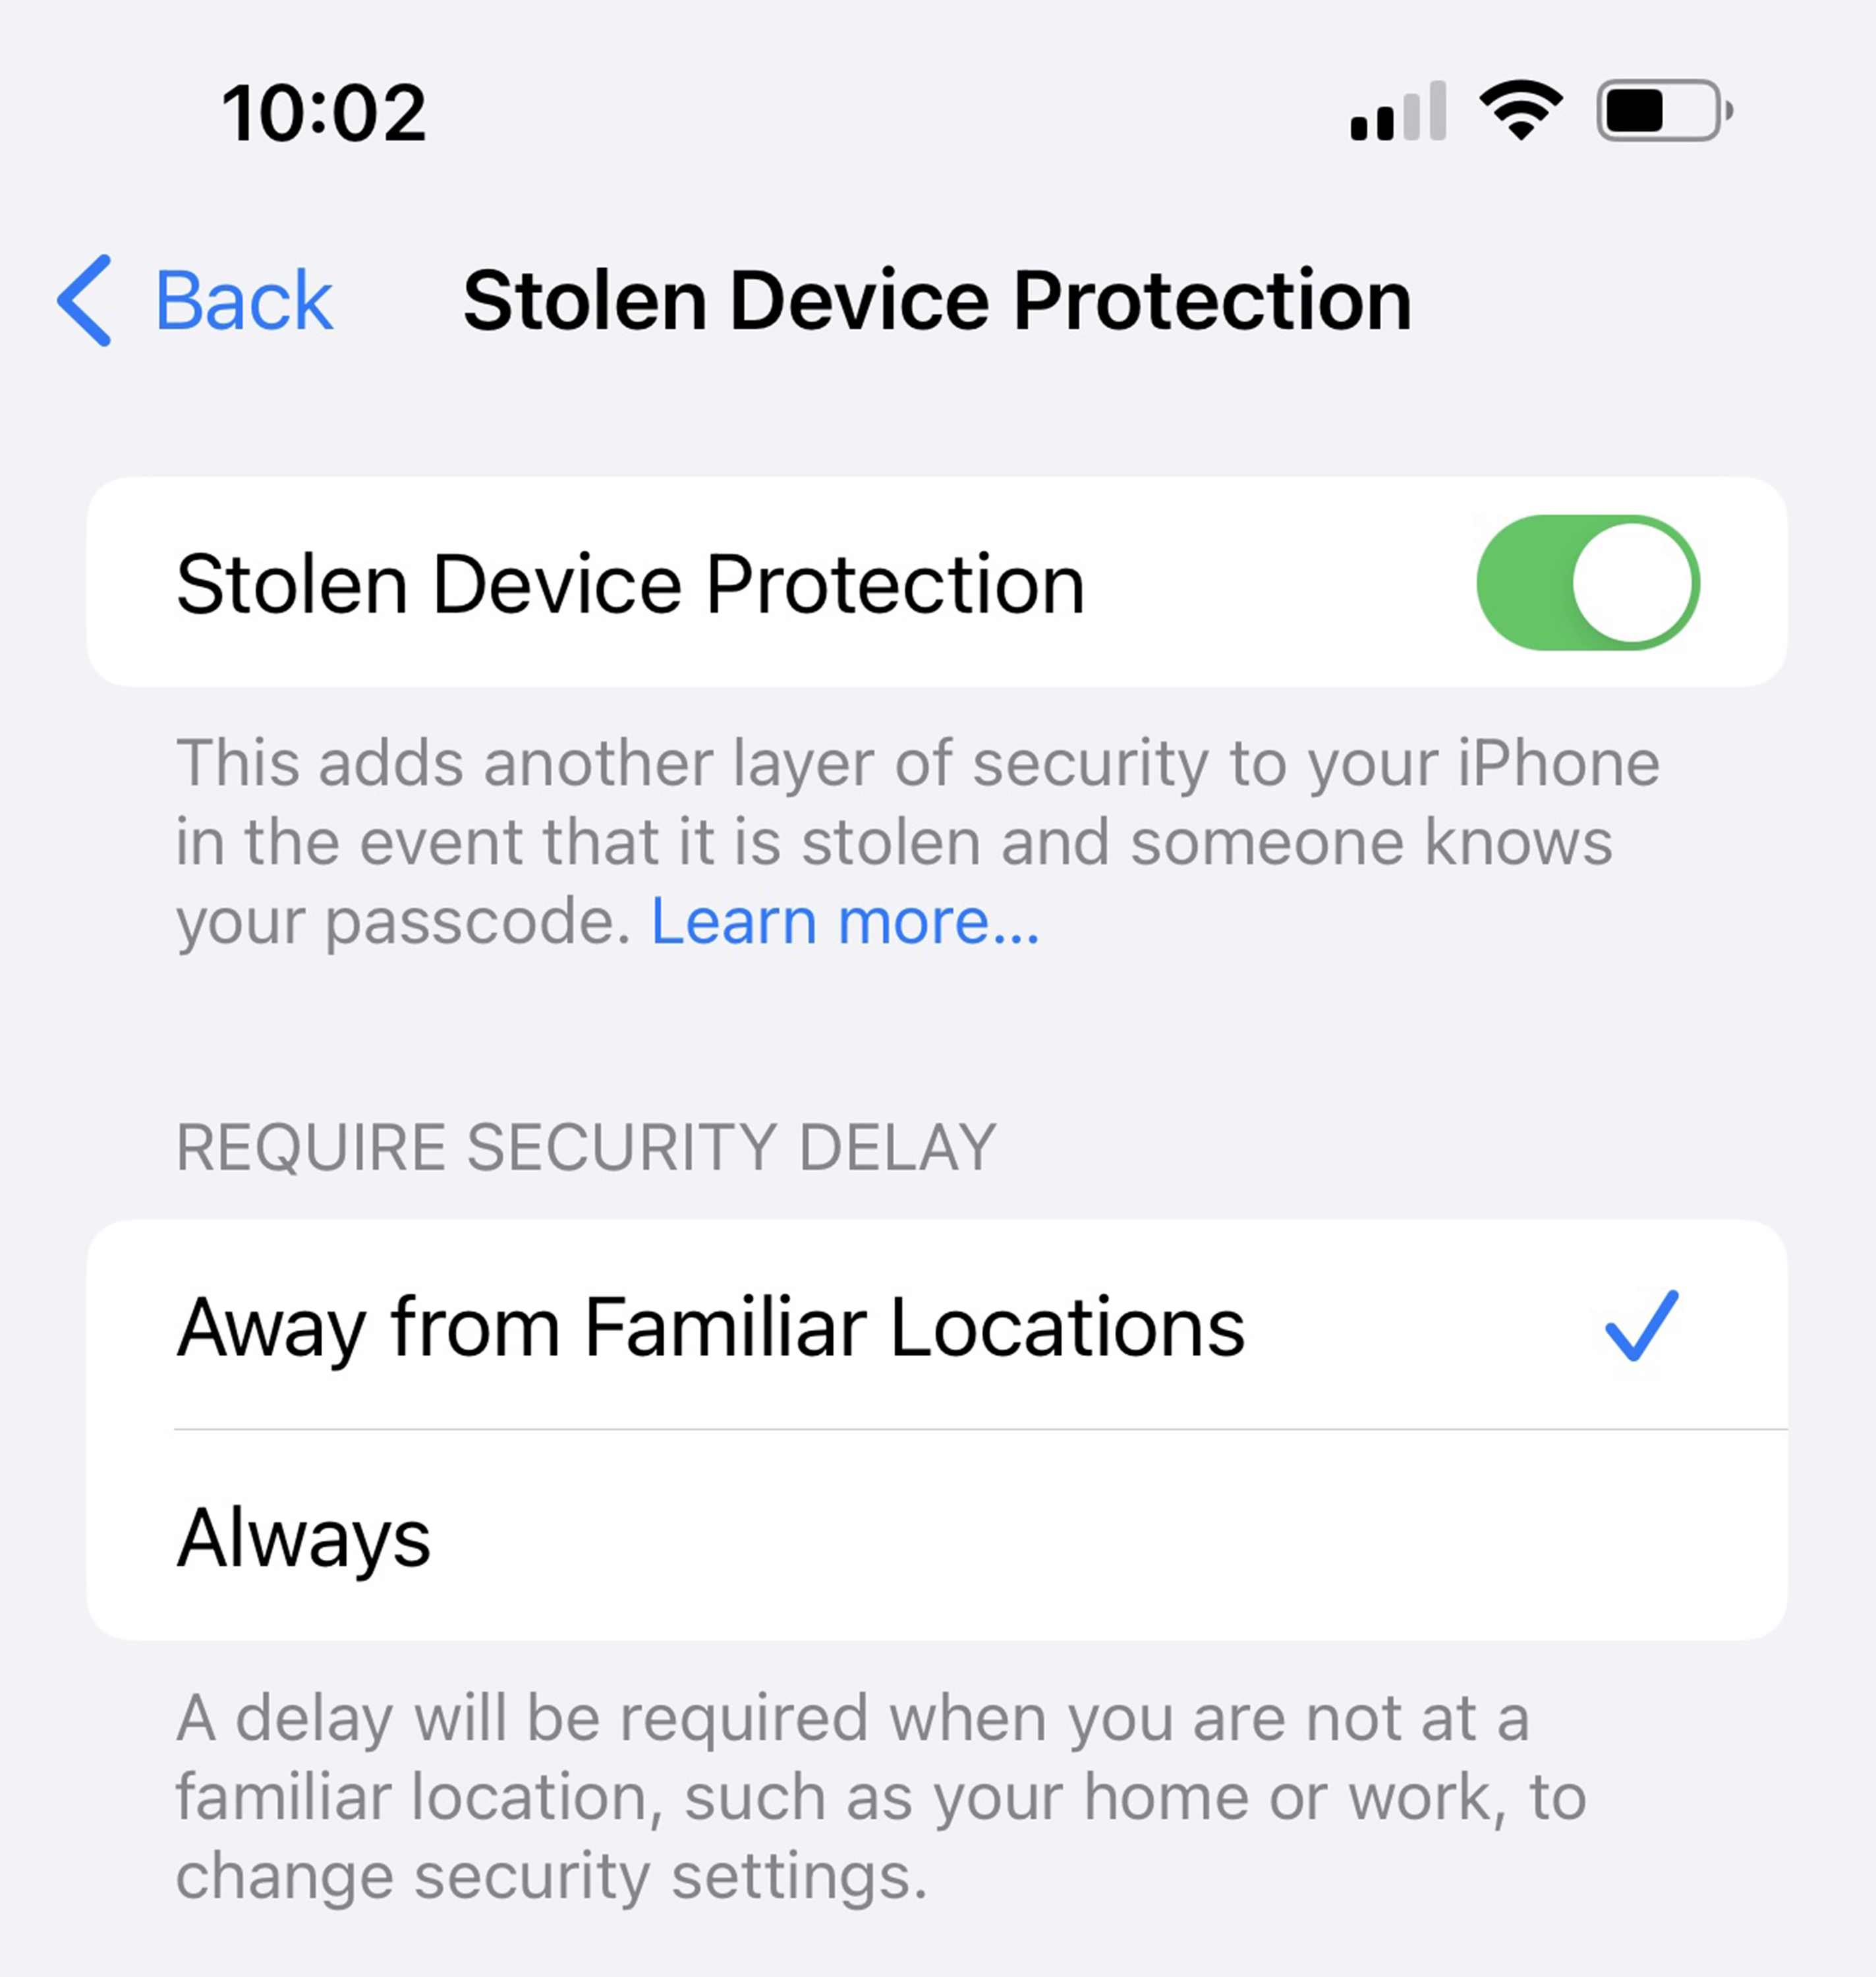 These security enhancements should make it harder for someone who steals an iPhone and knows...